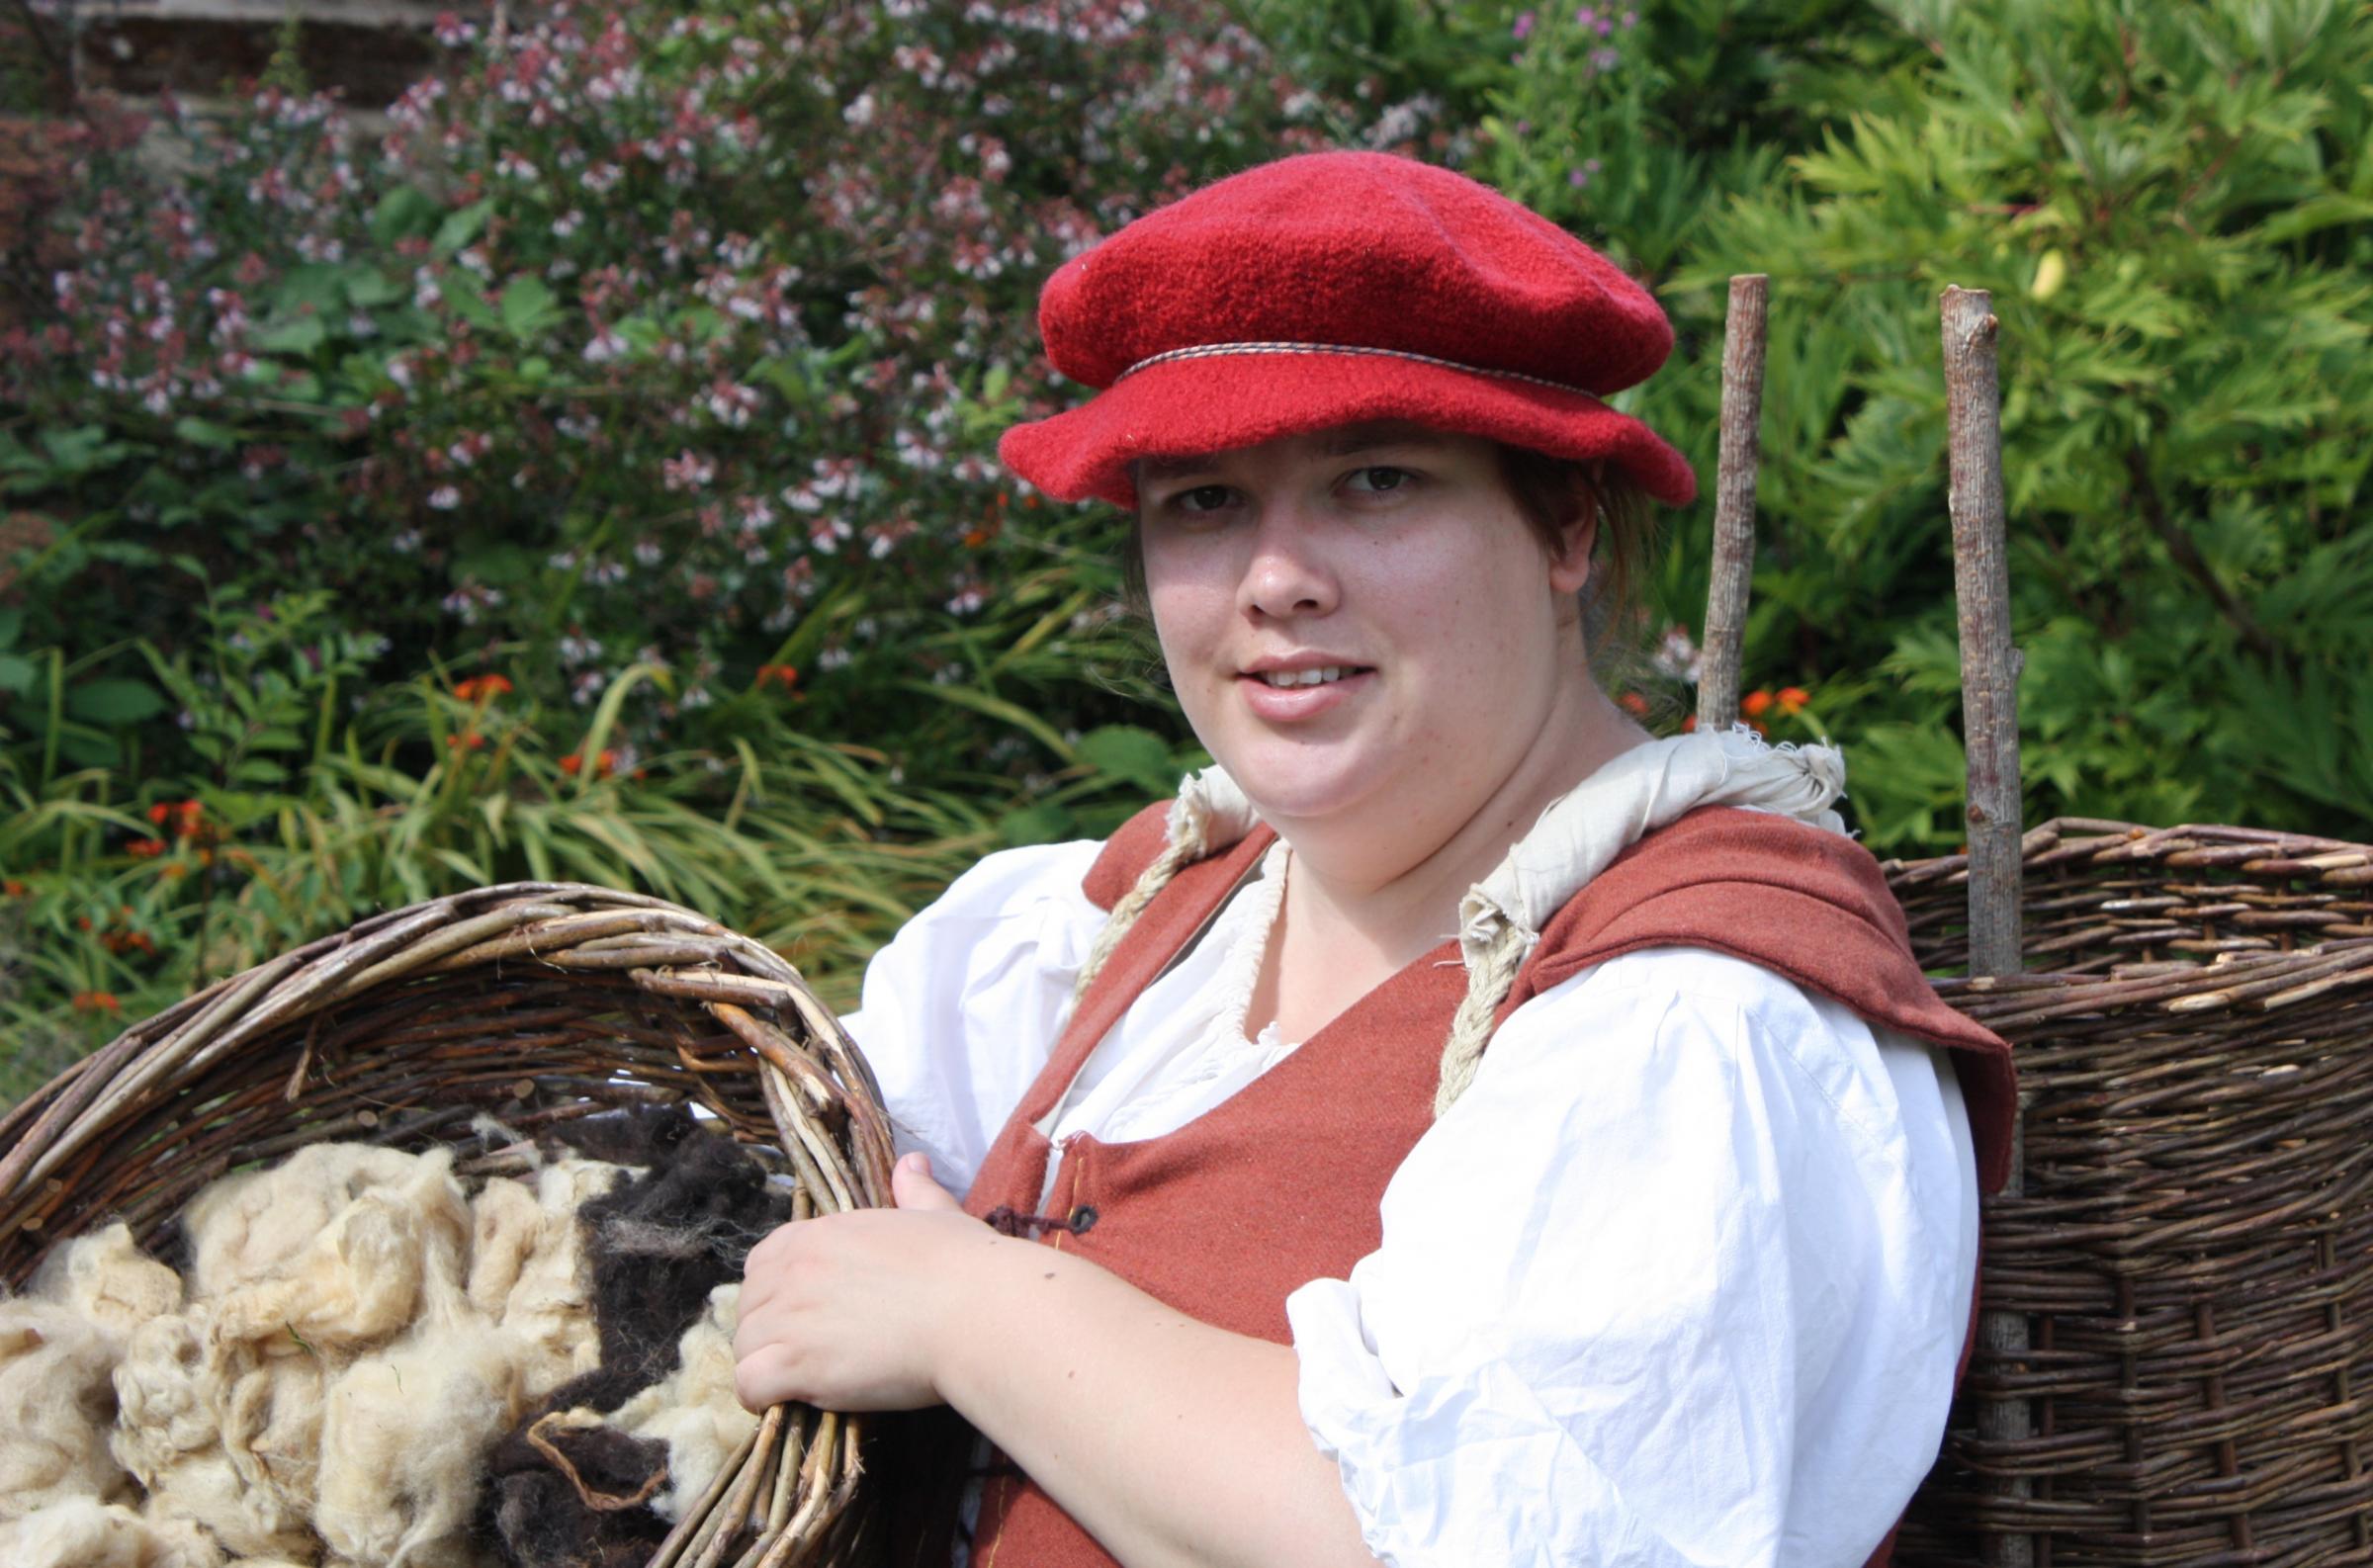 Worcesters wealth was based on the wool trade. Pictured is Helen Harding, from Discover History